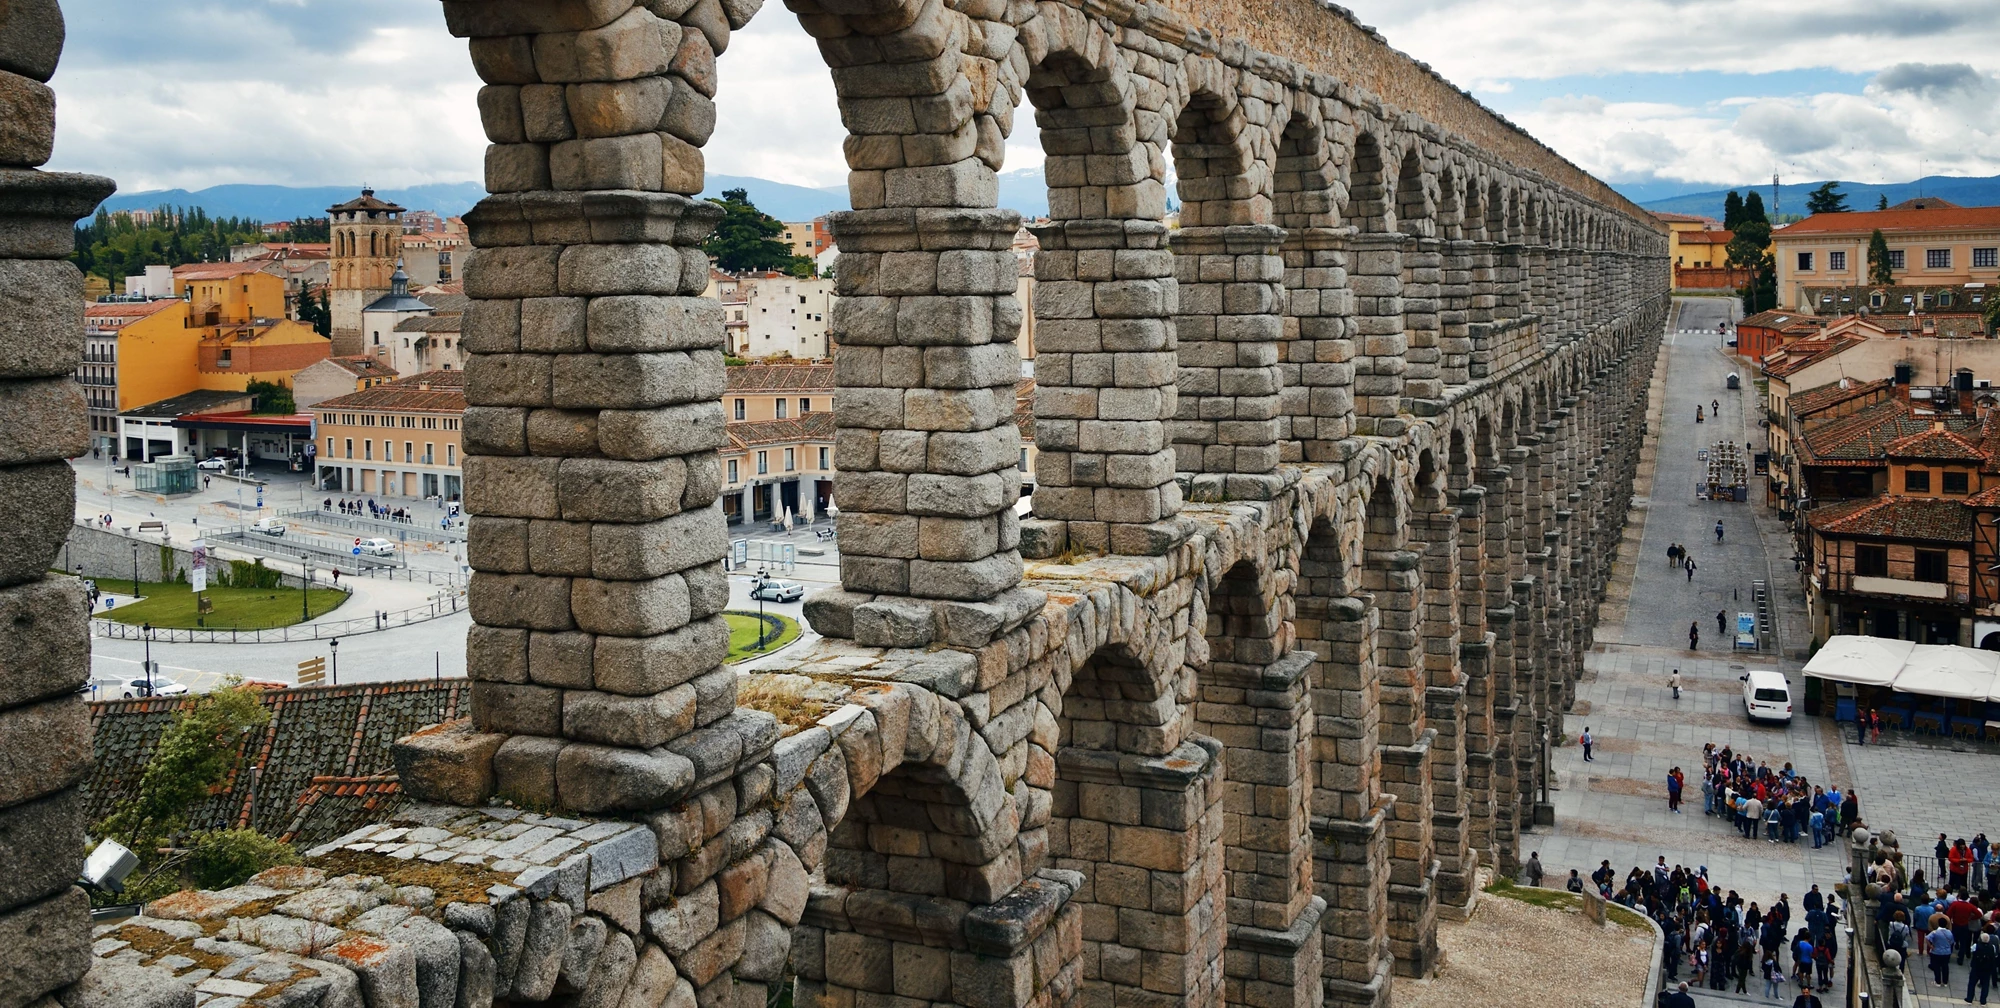 Roman aqueducts, used to transport clean water to populated areas, were designed and built as early as 312 B.C.